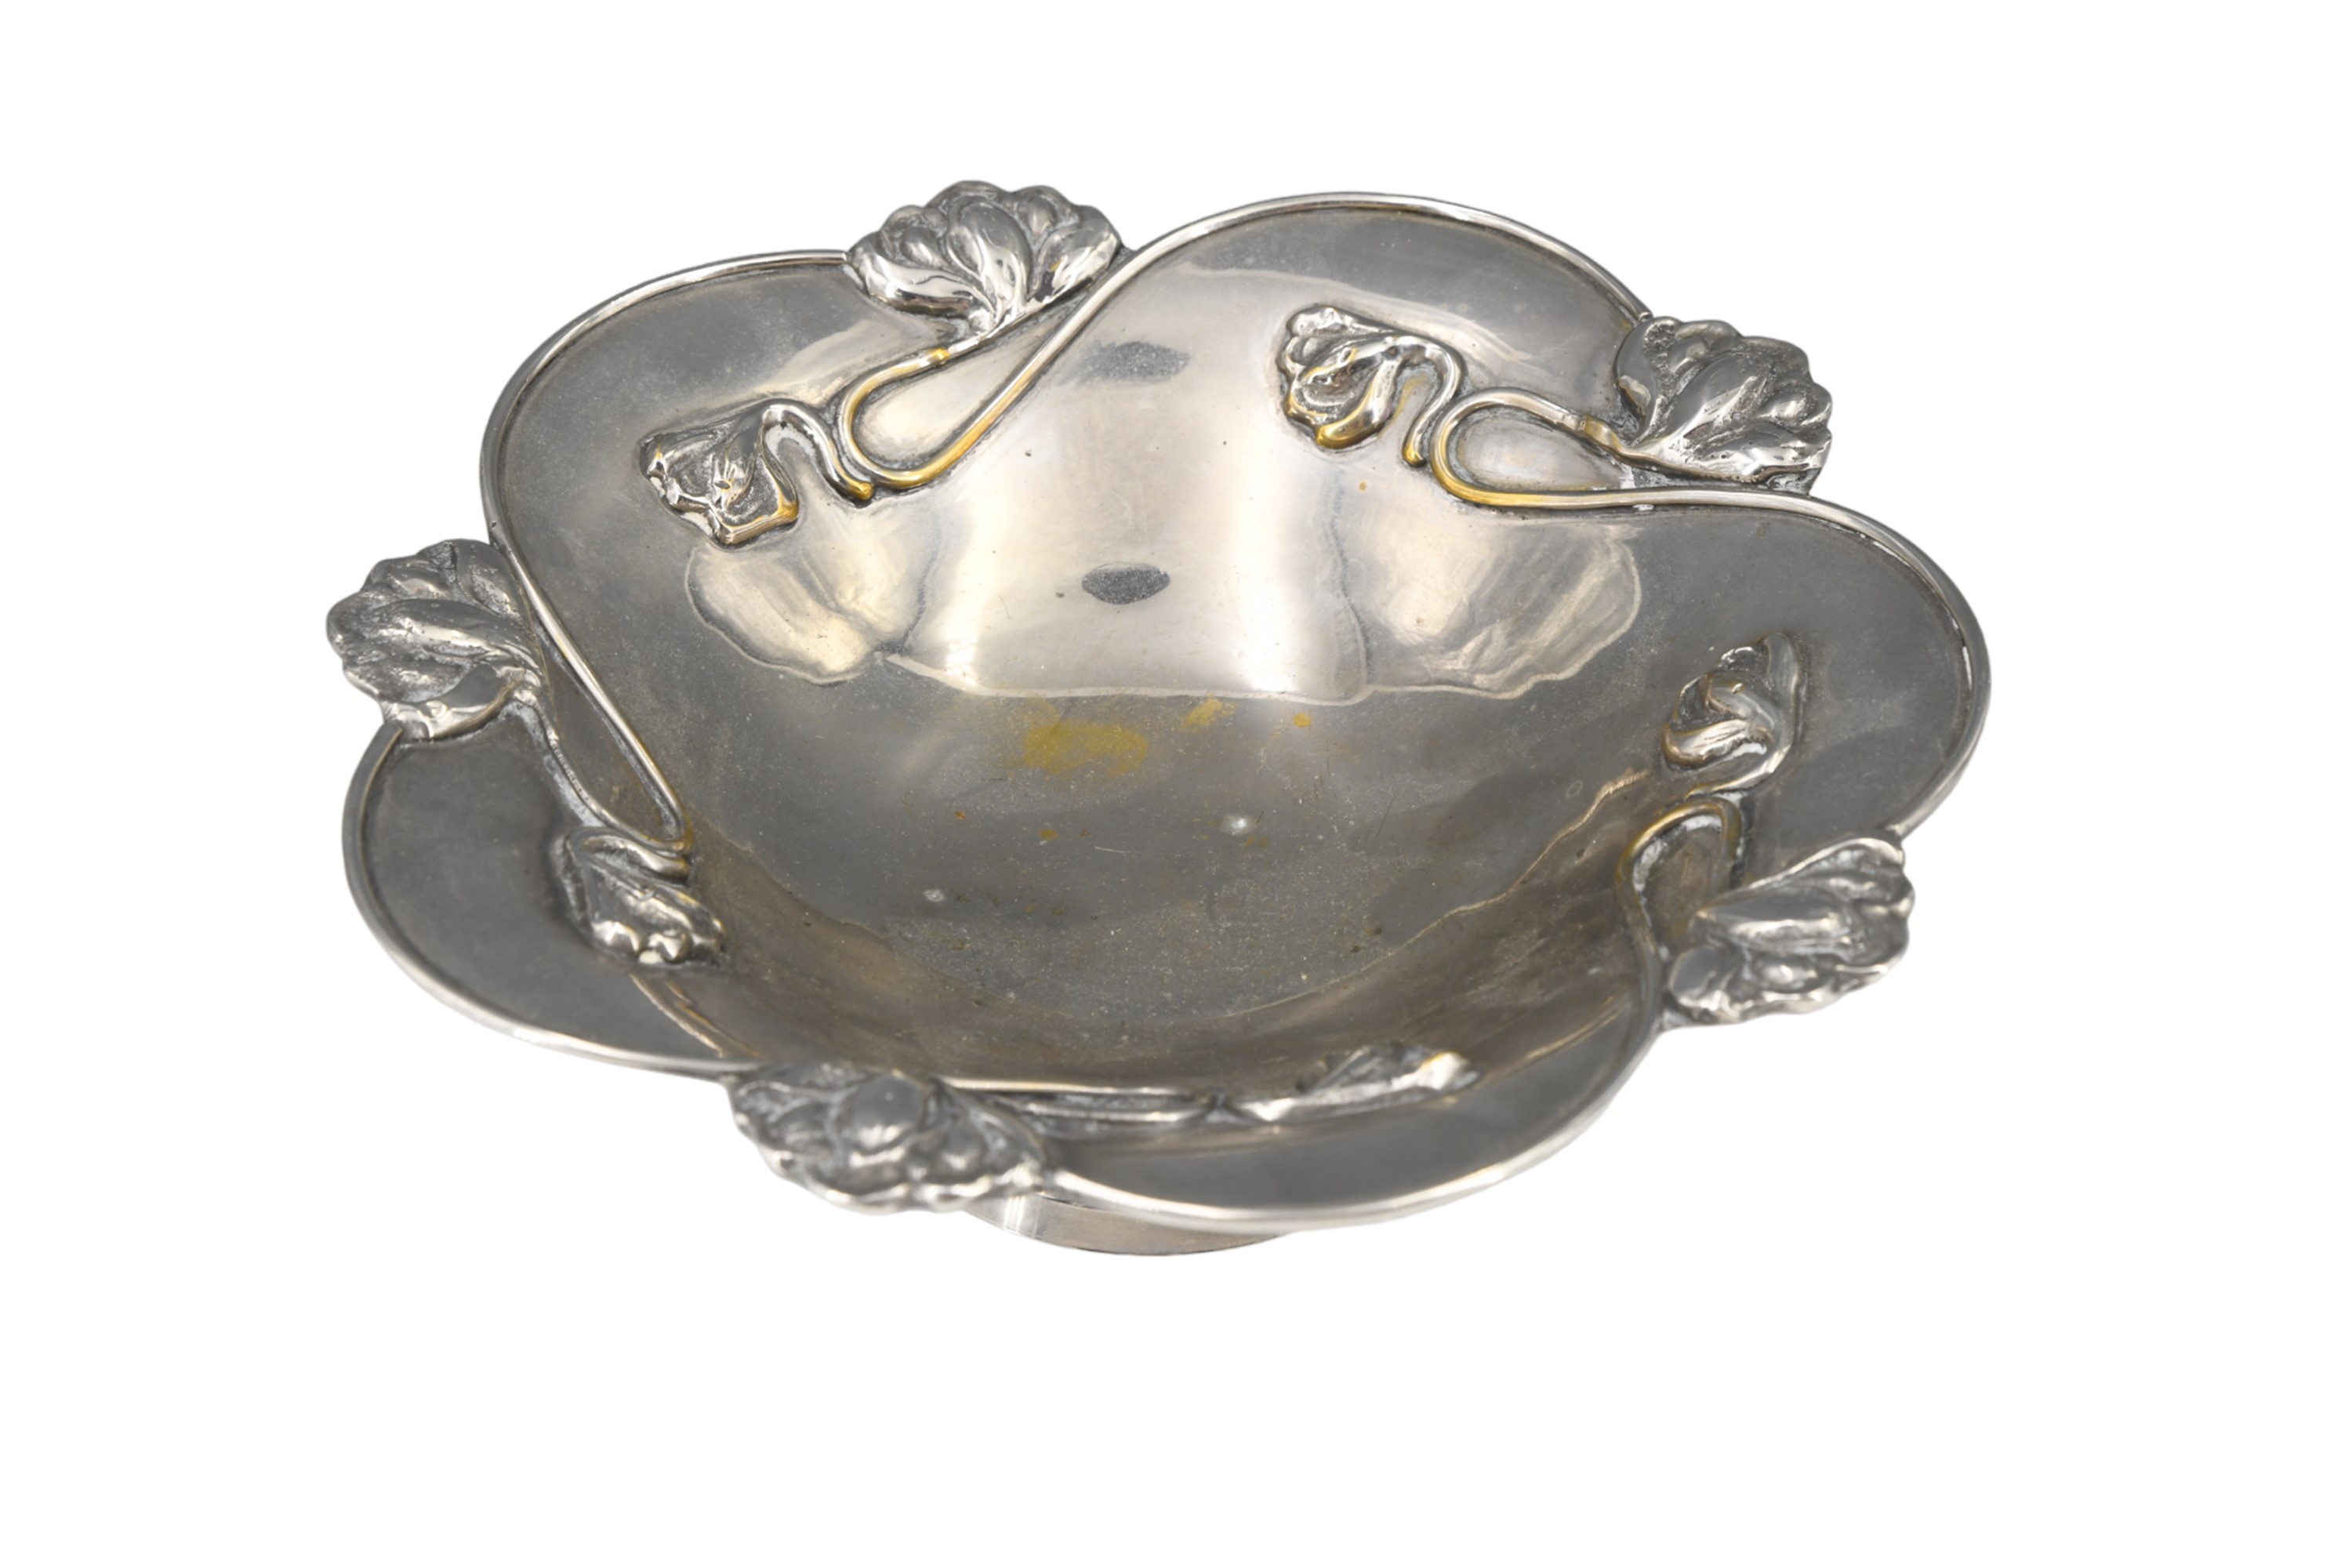 A silver plated Art Nouveau footed dish, 22 cm